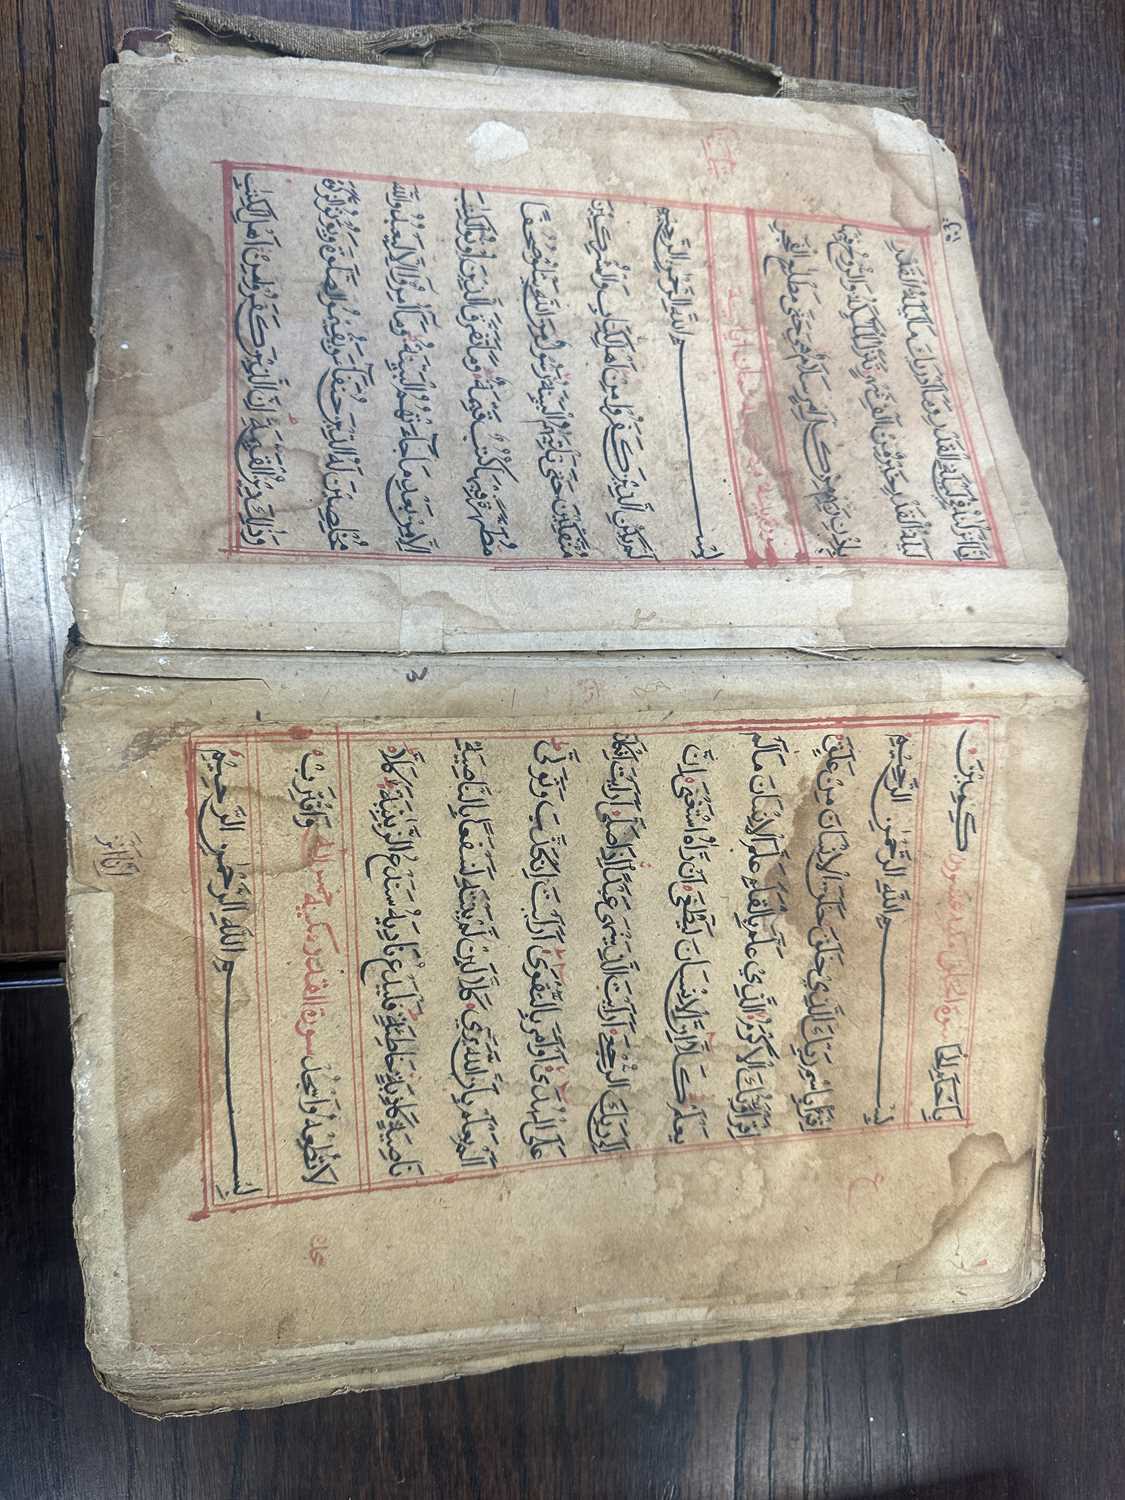 AN EARLY COPY OF THE KORAN LEATHER BOUND BOOK - Image 32 of 44